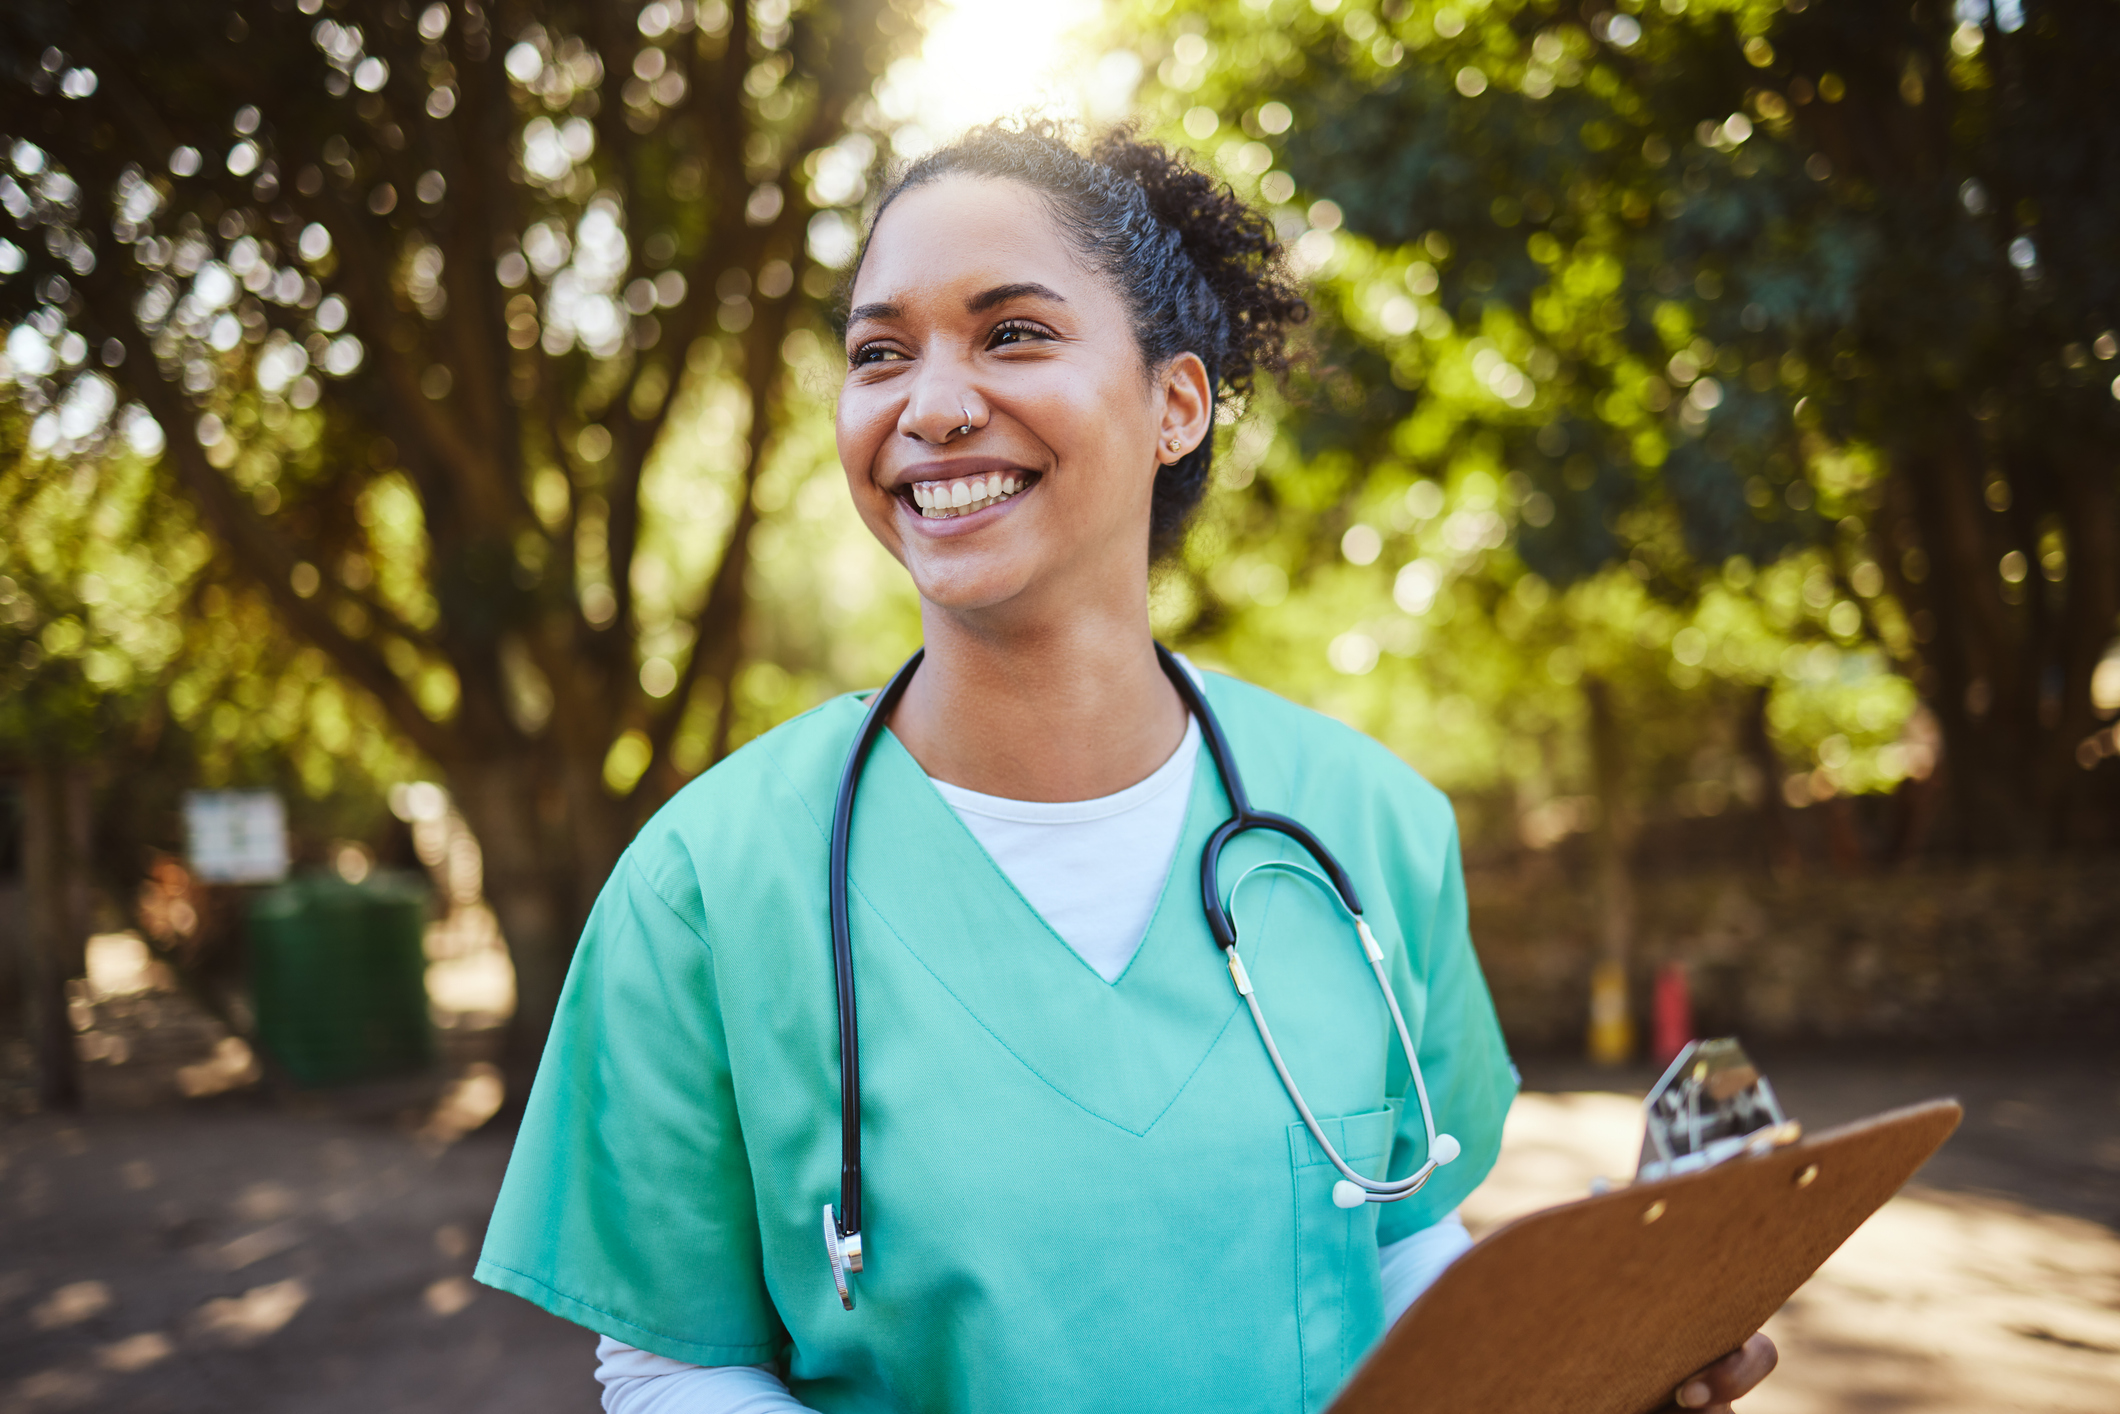 A smiling woman wearing green medical scrubs and a stethoscope around her neck holds a clipboard. She has curly hair pulled back and stands outdoors with trees in the background, illuminated by sunlight.